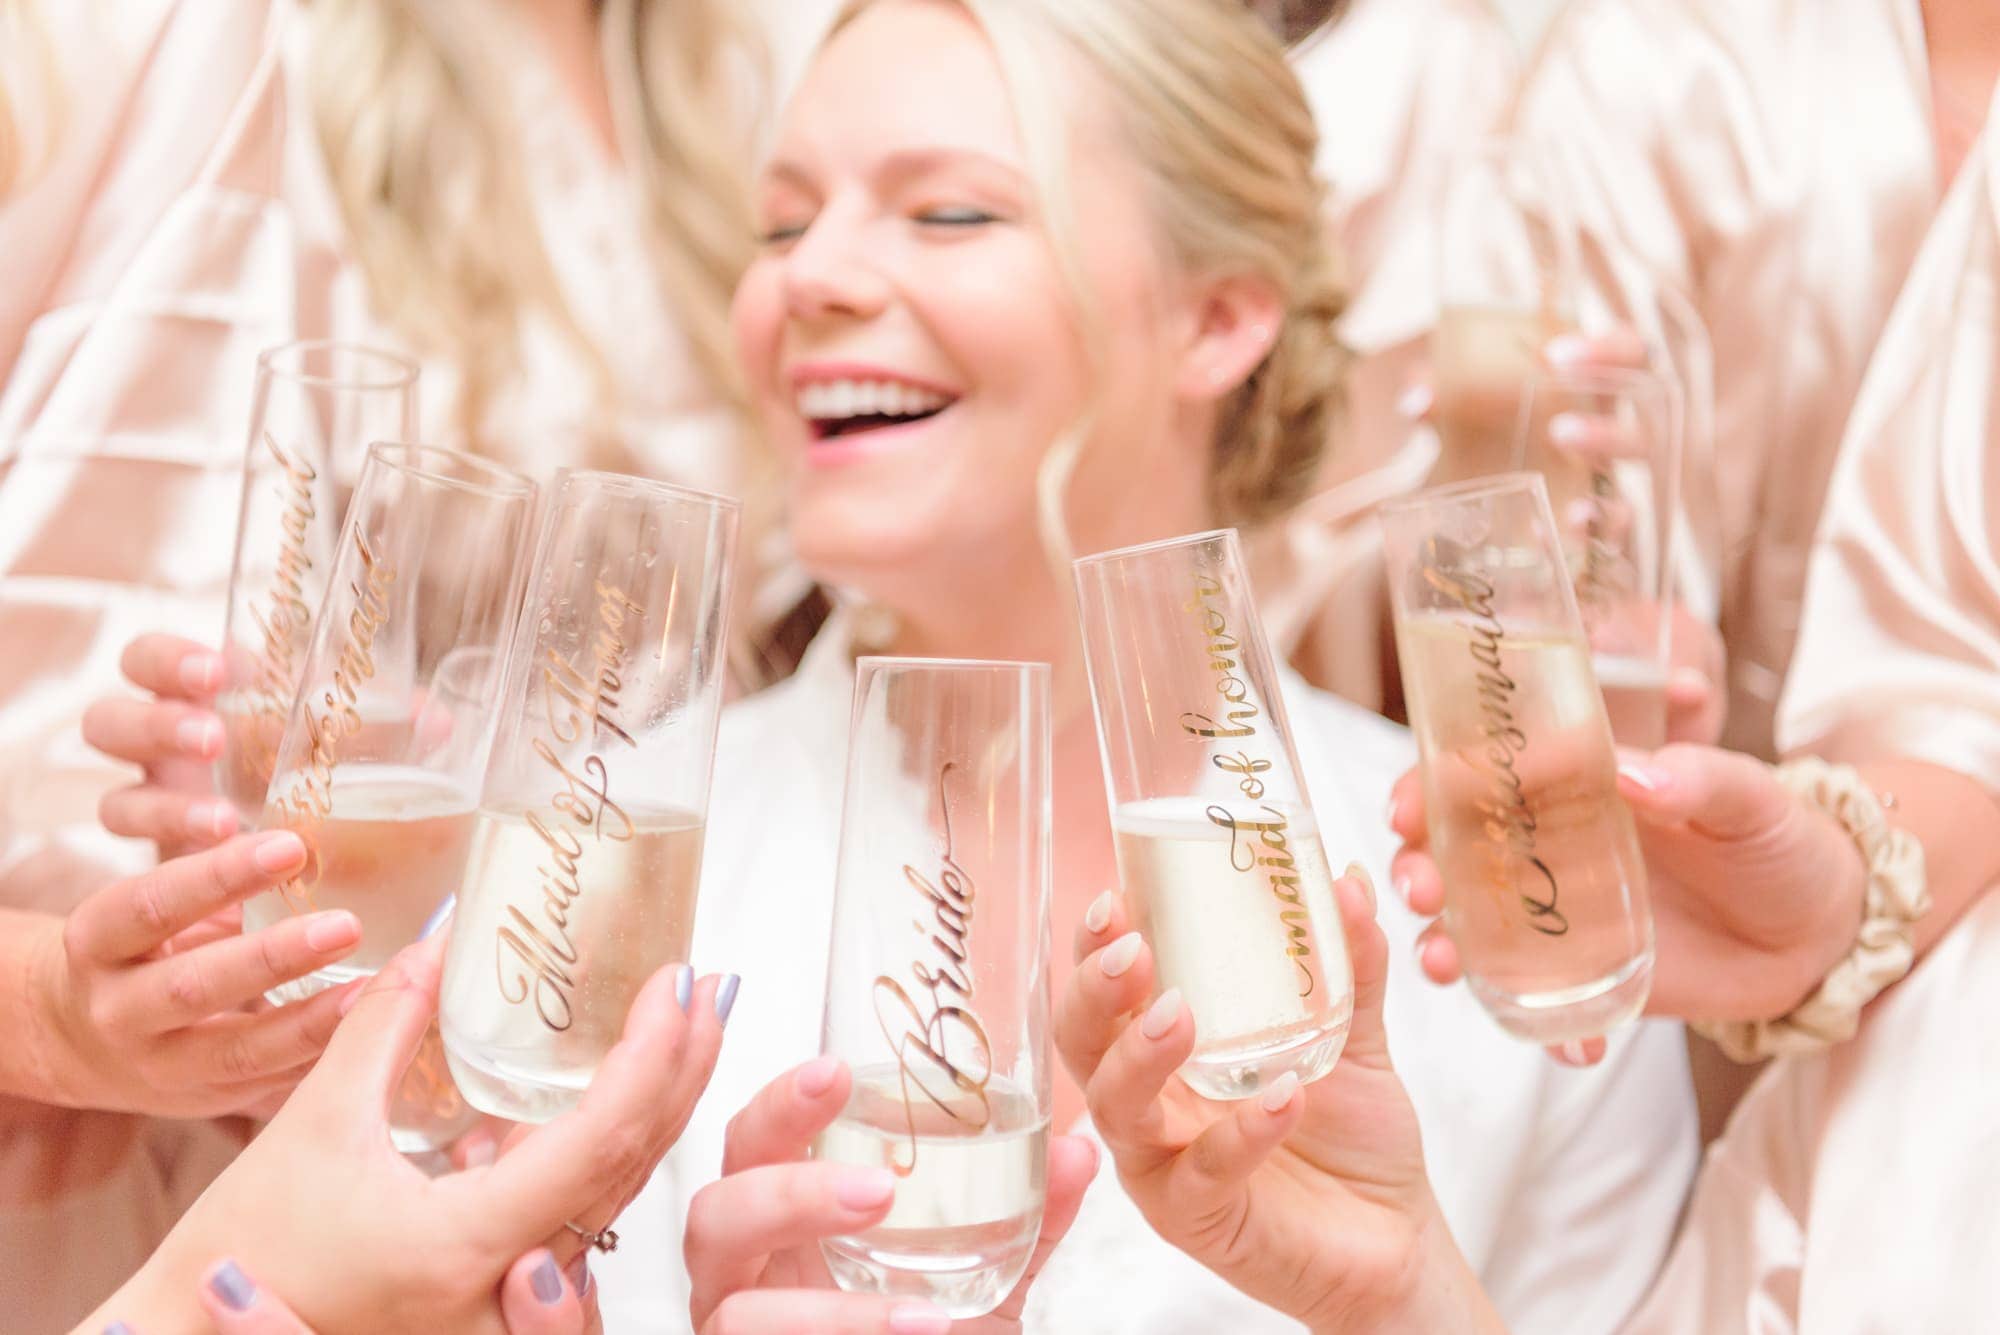 Charlotte's Longview Country Club was able to host this cute bride, who gifted custom champagne glasses to her bridesmaids.